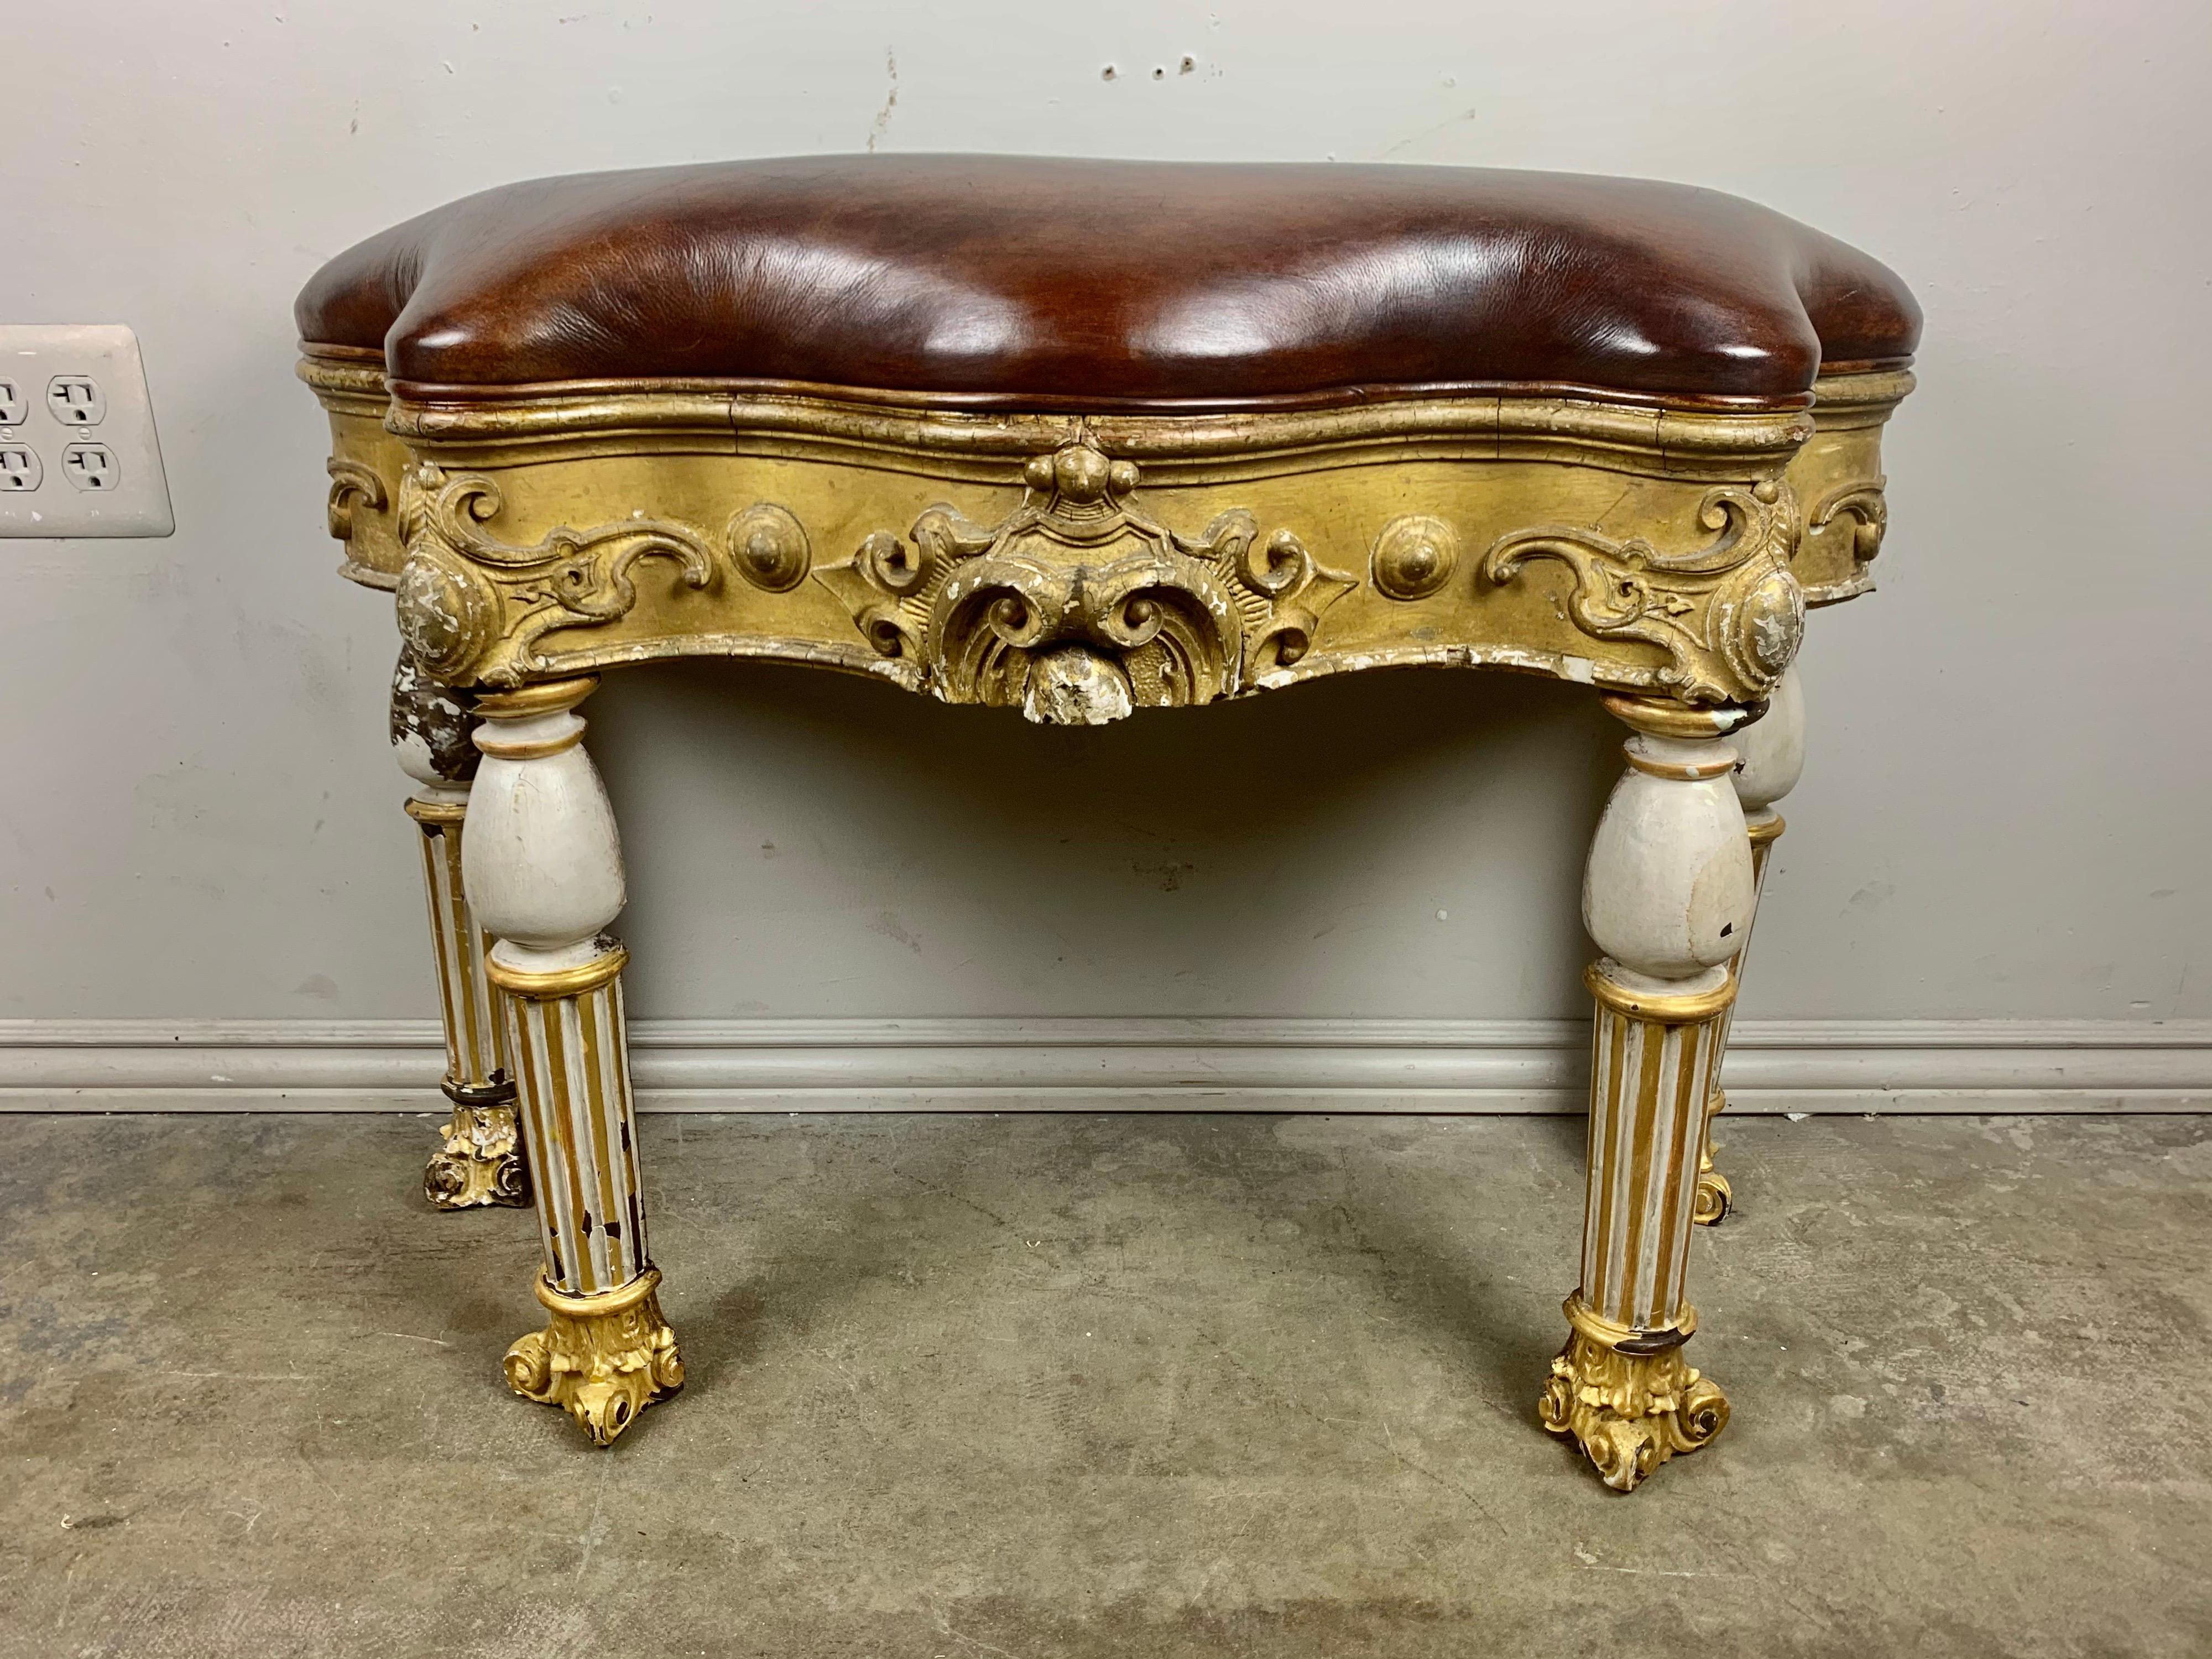 Custom serpentine shaped bench made with antique Italian painted and parcel gilt fluted legs with capital feet. The bench is newly upholstered in chestnut colored leather with self cord detail.